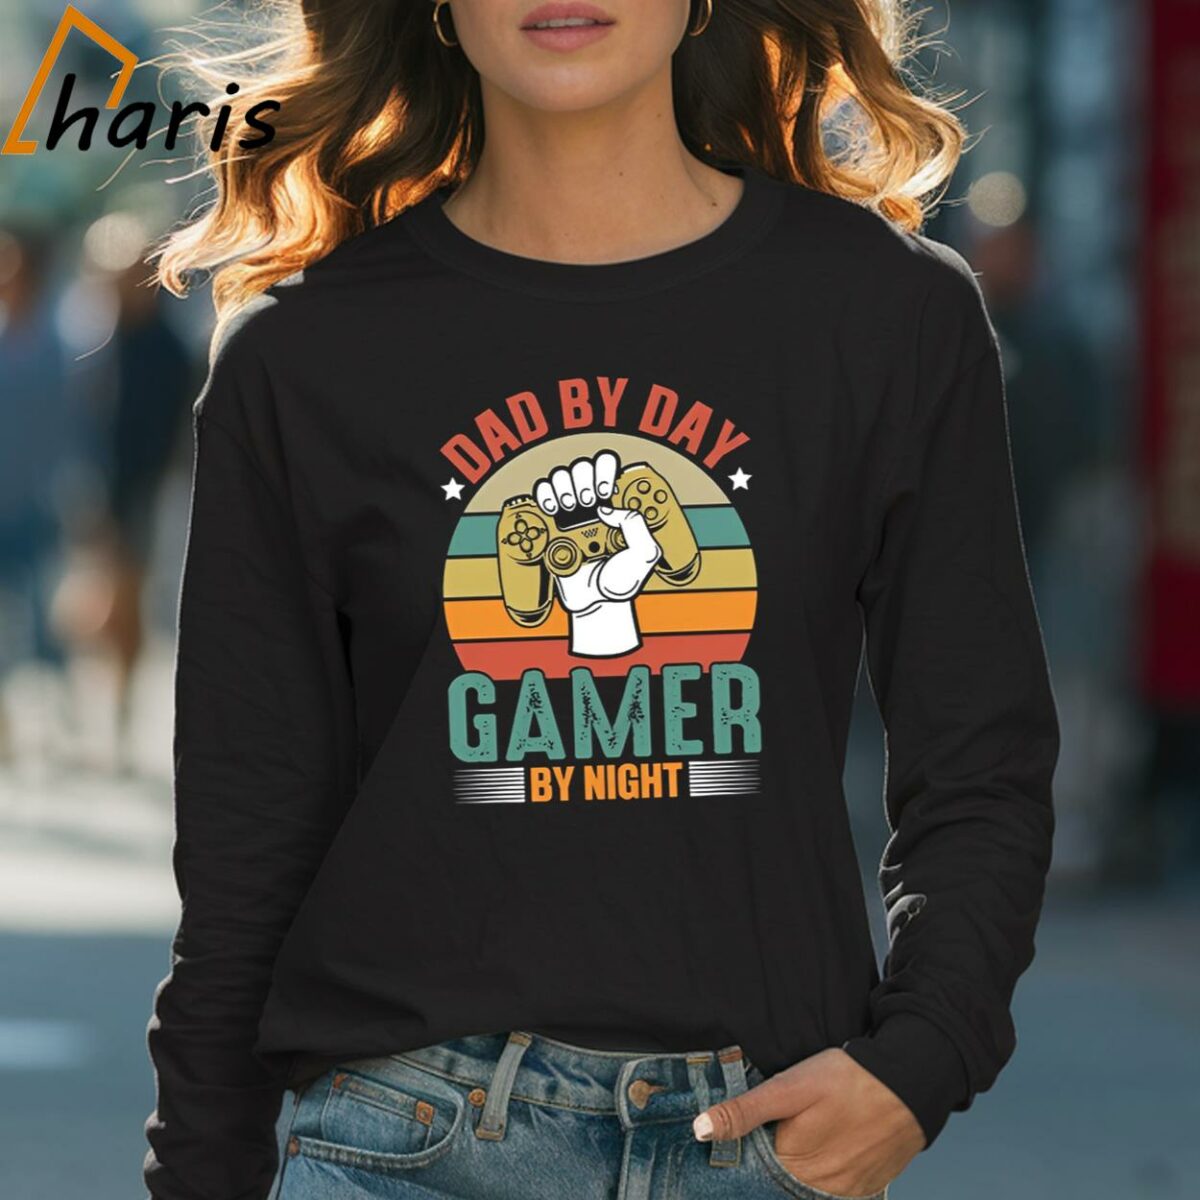 Dad By Day Gamer By Night T shirt 4 Long sleeve shirt